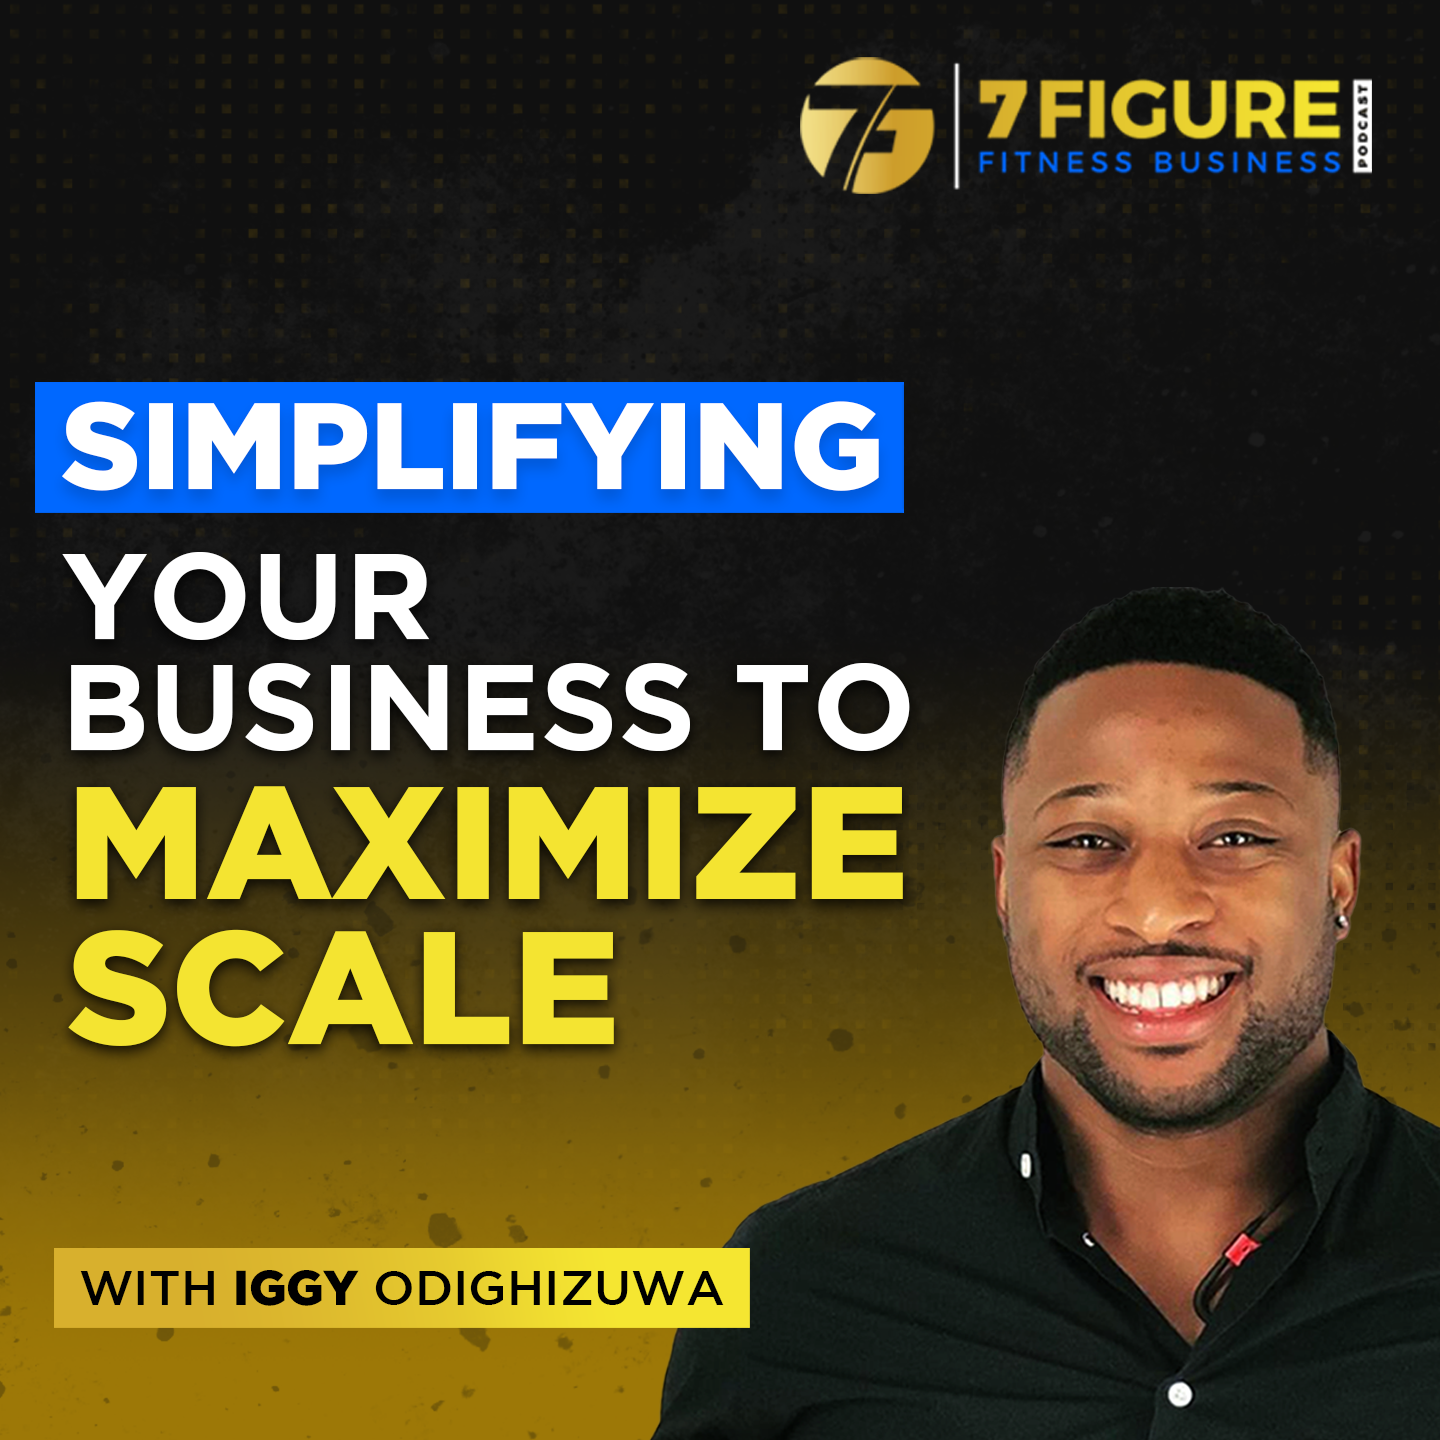 Simplifying Your Business To Maximize Scale